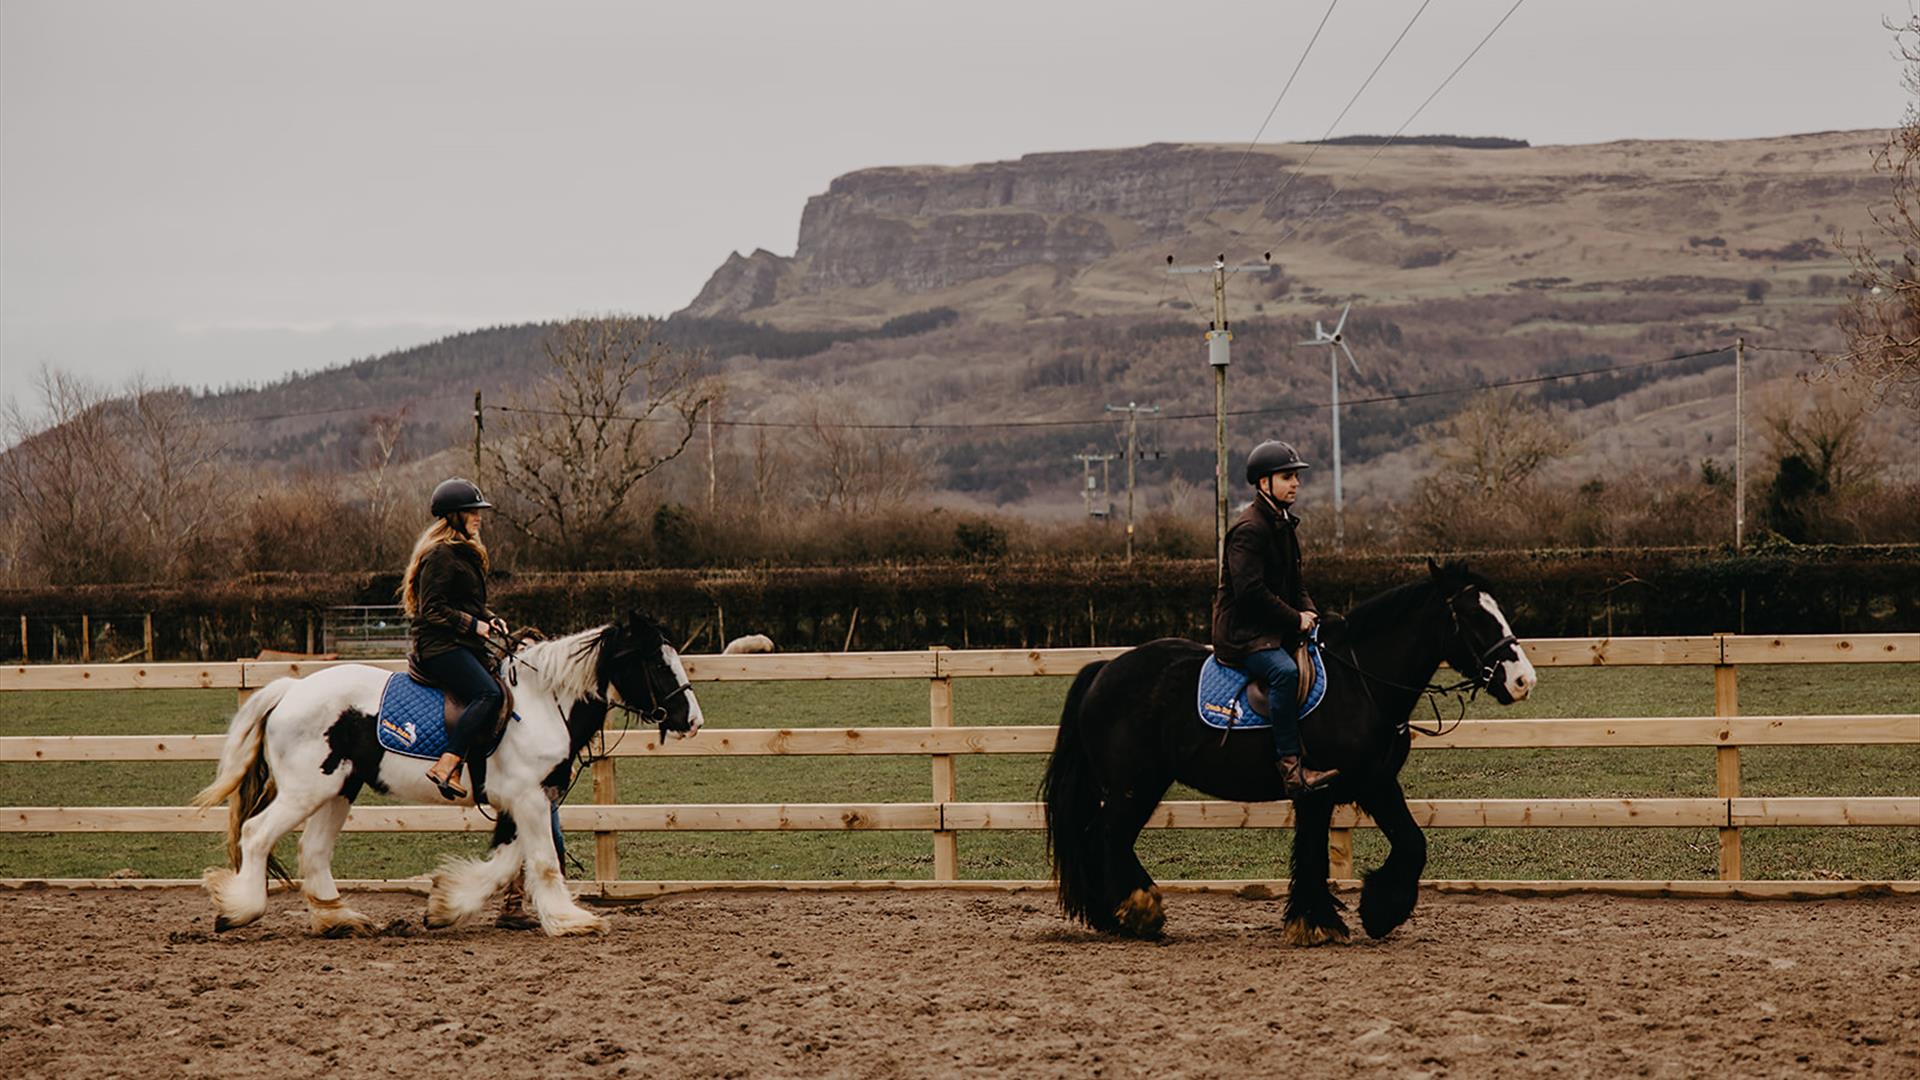 A man on a black horse and a woman on a white horse trotting around an arena with Binevenagh mountain in the background